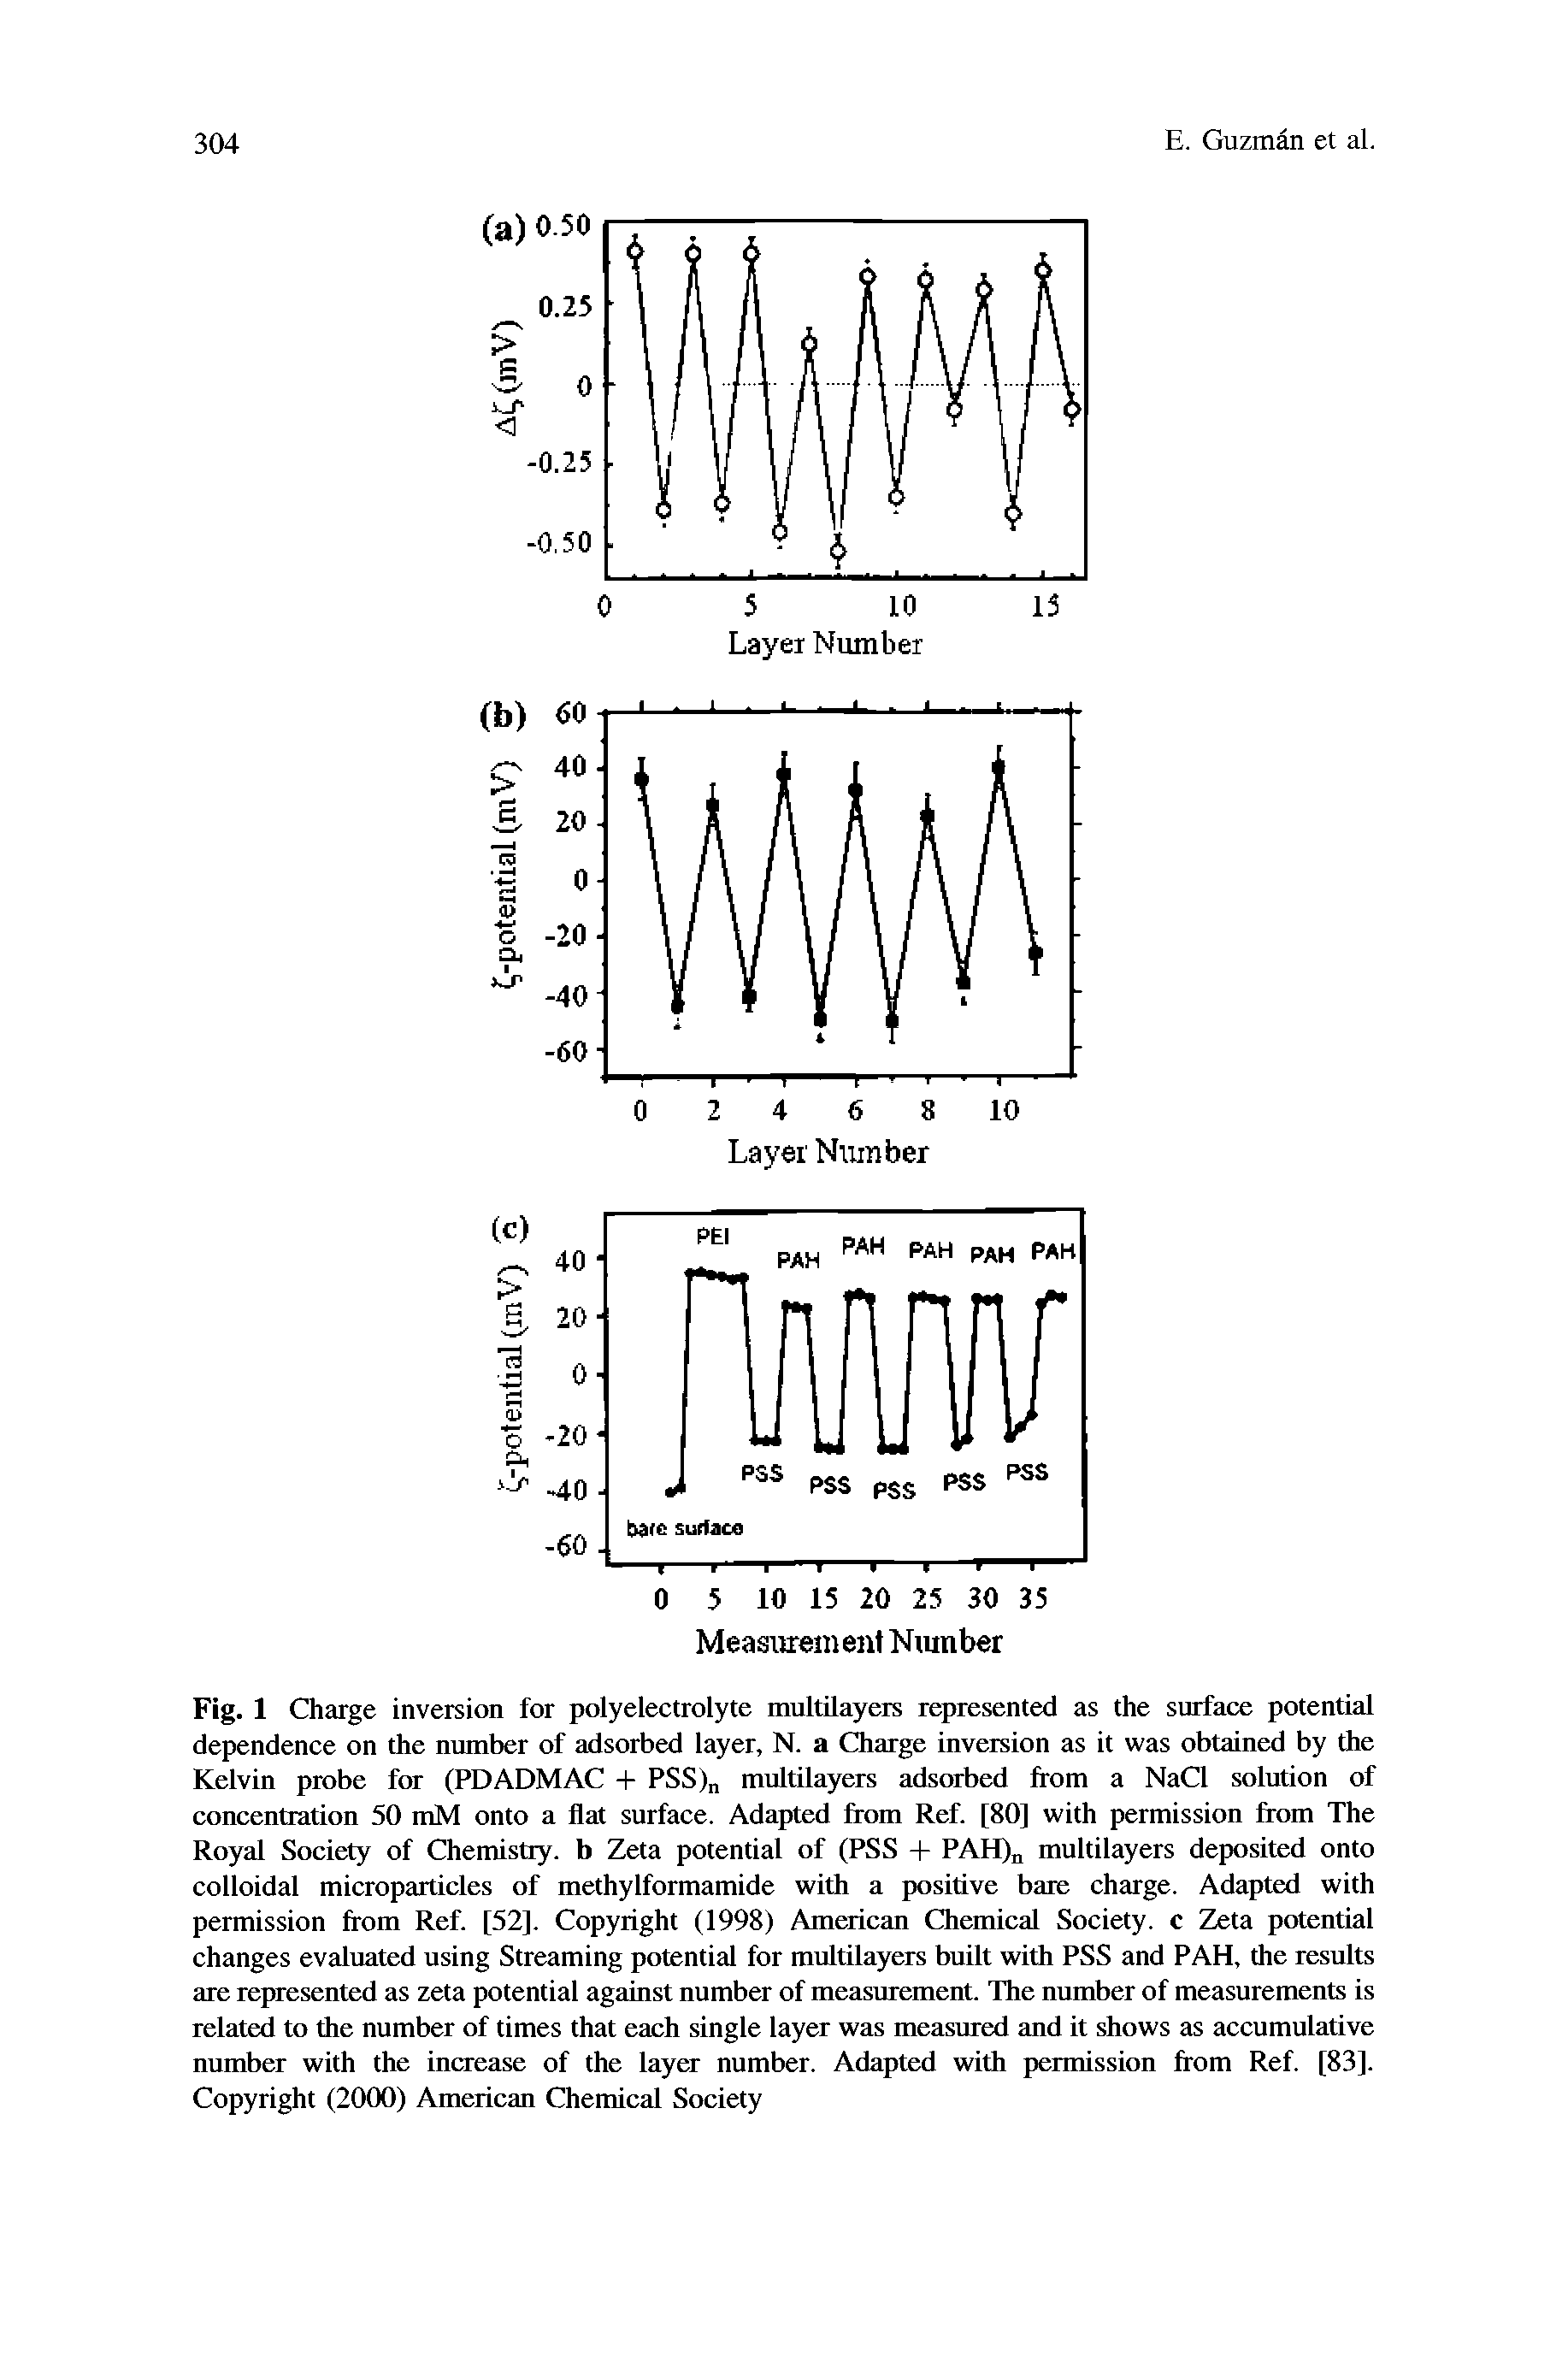 Fig. 1 Charge inversion for polyelectrolyte multilayers represented as the surface potential dependence on the number of adsorbed layer, N. a Charge inversion as it was obtained by the Kelvin probe for (PDADMAC + PSS) multilayers adsorbed from a NaCl solution of concentration 50 mM onto a flat surface. Adapted from Ref. [80] with permission from The Royal Society of Chemistry, b Zeta potential of (PSS + PAH)n multilayers deposited onto colloidal microparticles of methylformamide with a positive bare charge. Adapted with permission from Ref. [52]. Copyright (1998) American Chemical Society, c Zeta potential changes evaluated using Streaming potential for multilayers built with PSS and PAH, the results are represented as zeta potential against number of measurement. The number of measurements is related to the number of times that each single layer was measured and it shows as accumulative number with the increase of the layer number. Adapted with permission from Ref. [83]. Copyright (2000) American Chemical Society...